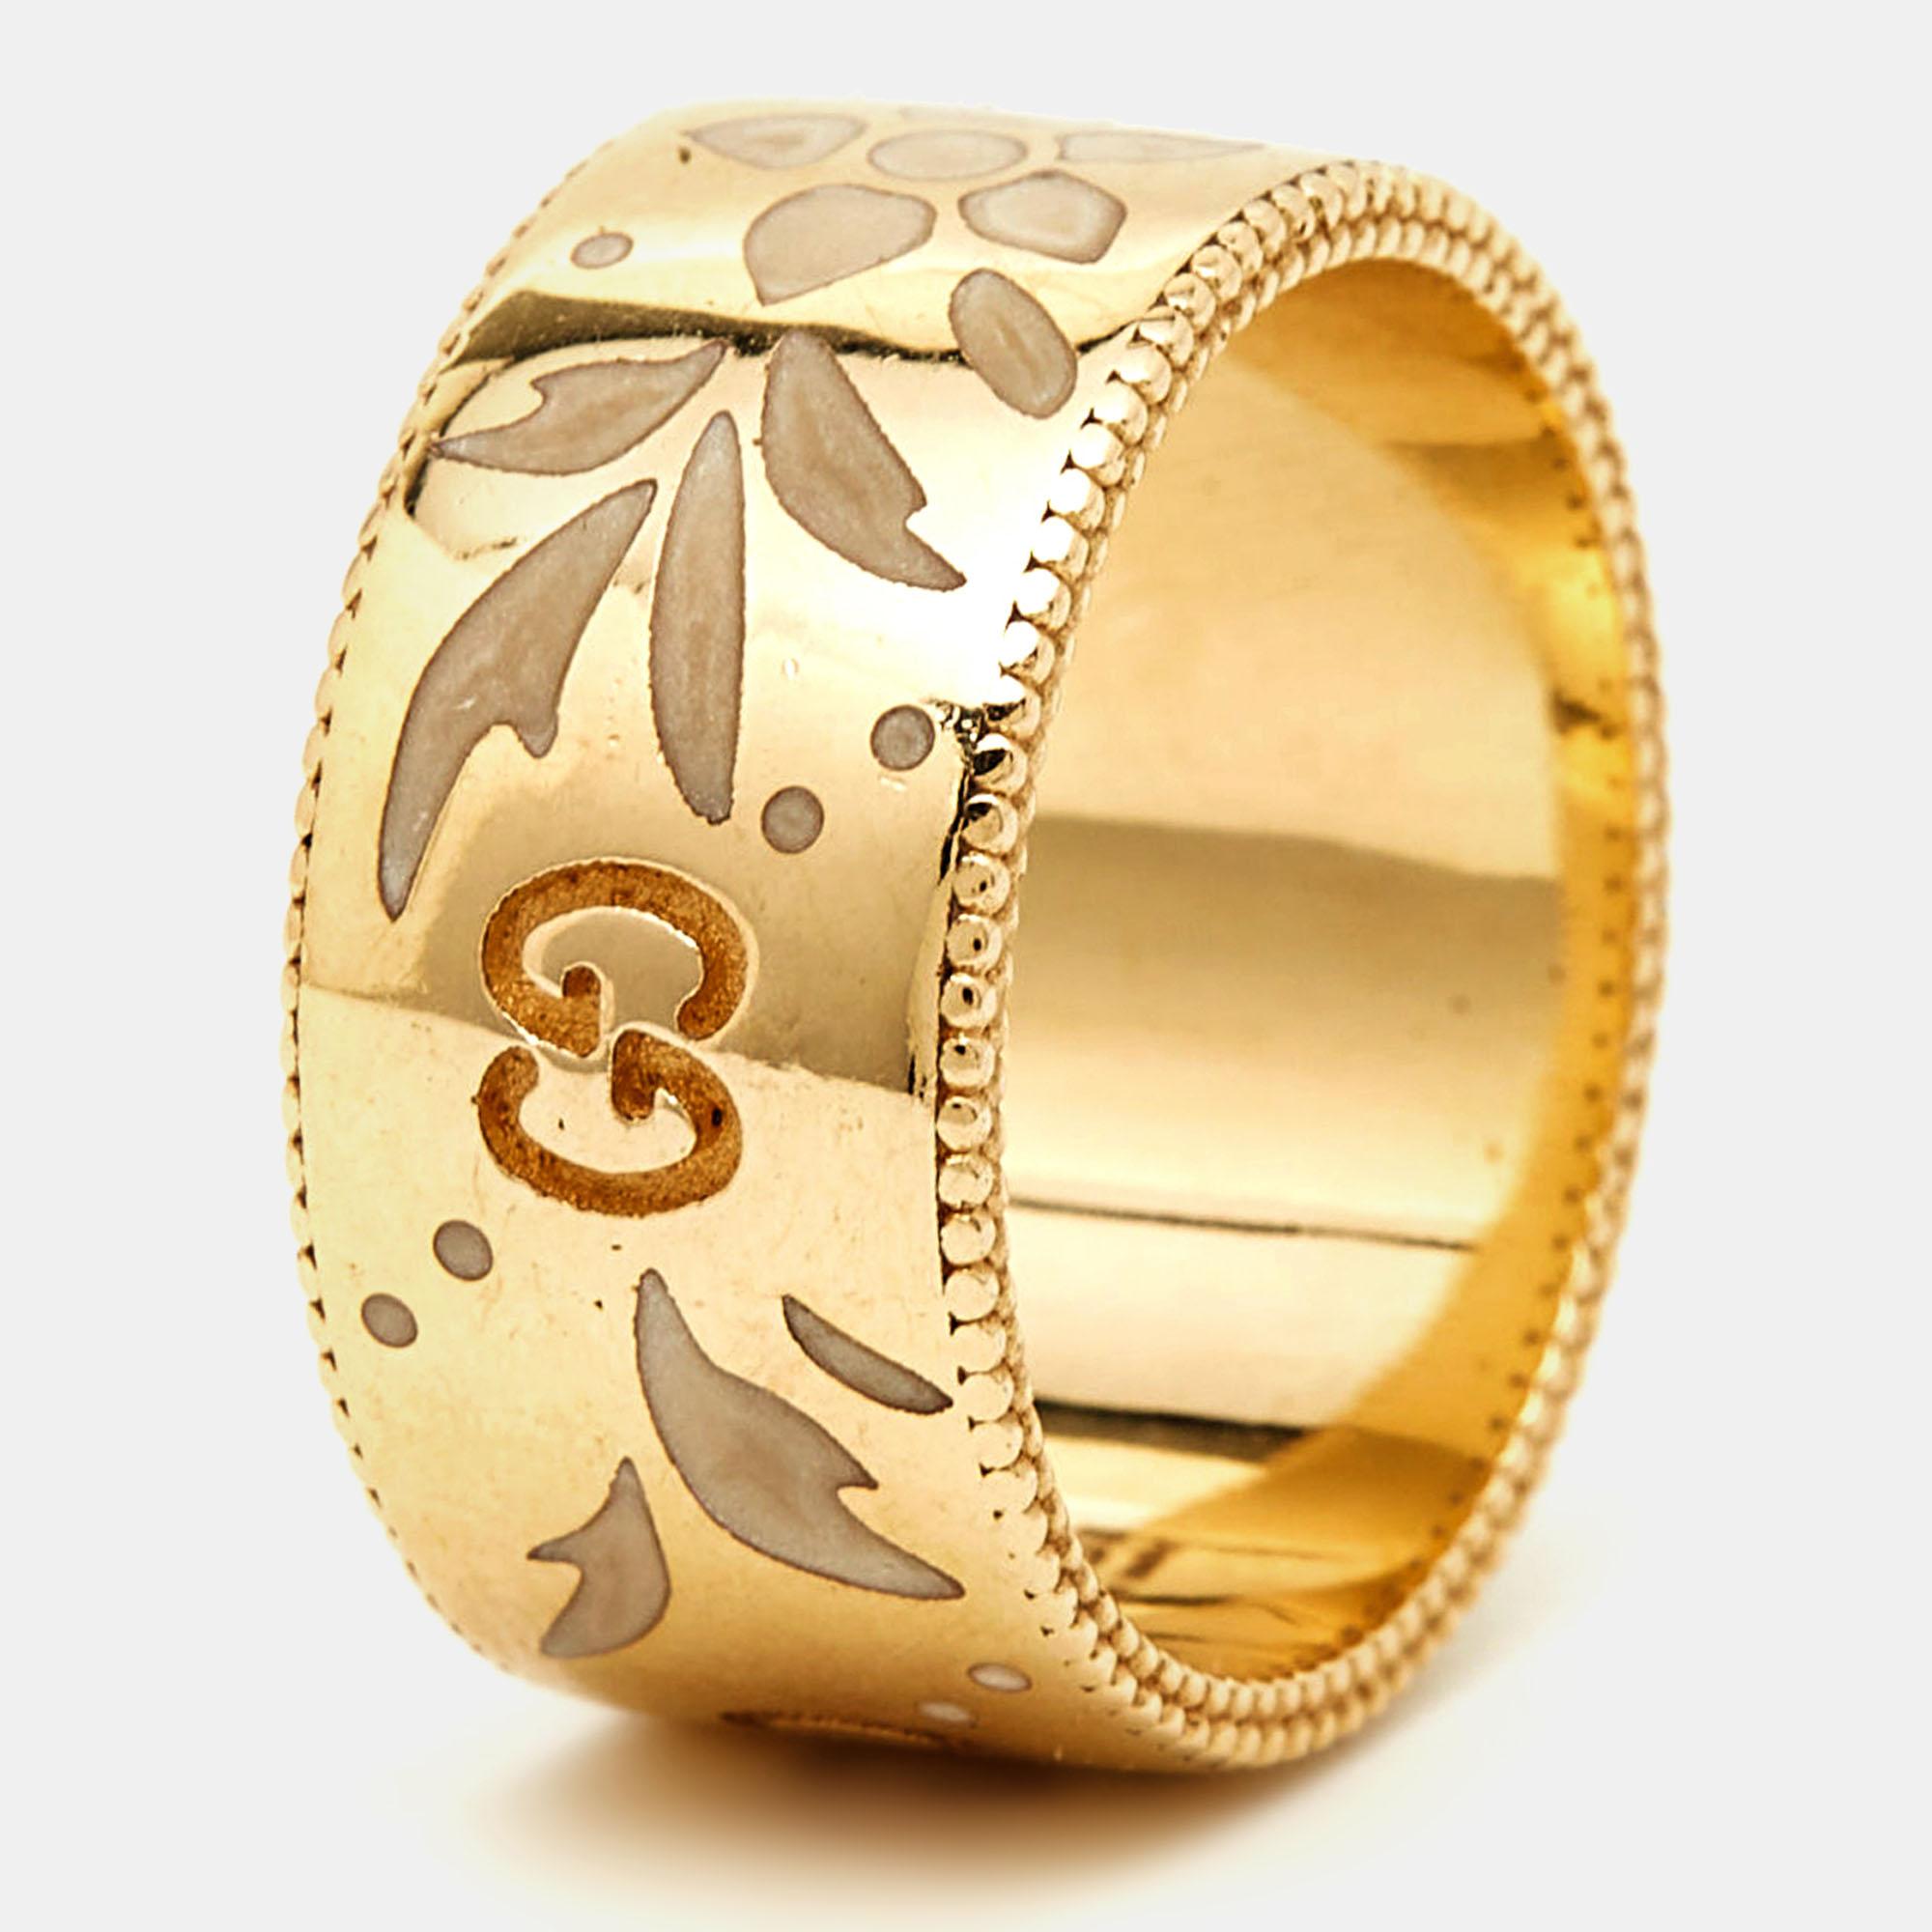 Crafted in lustrous 18k yellow gold, the Gucci GG Icon Blossom Ring exudes timeless charm. Its intricate design showcases the iconic GG motif adorned with delicate blossom accents in vibrant enamel. A fusion of luxury and artistry, this ring is a